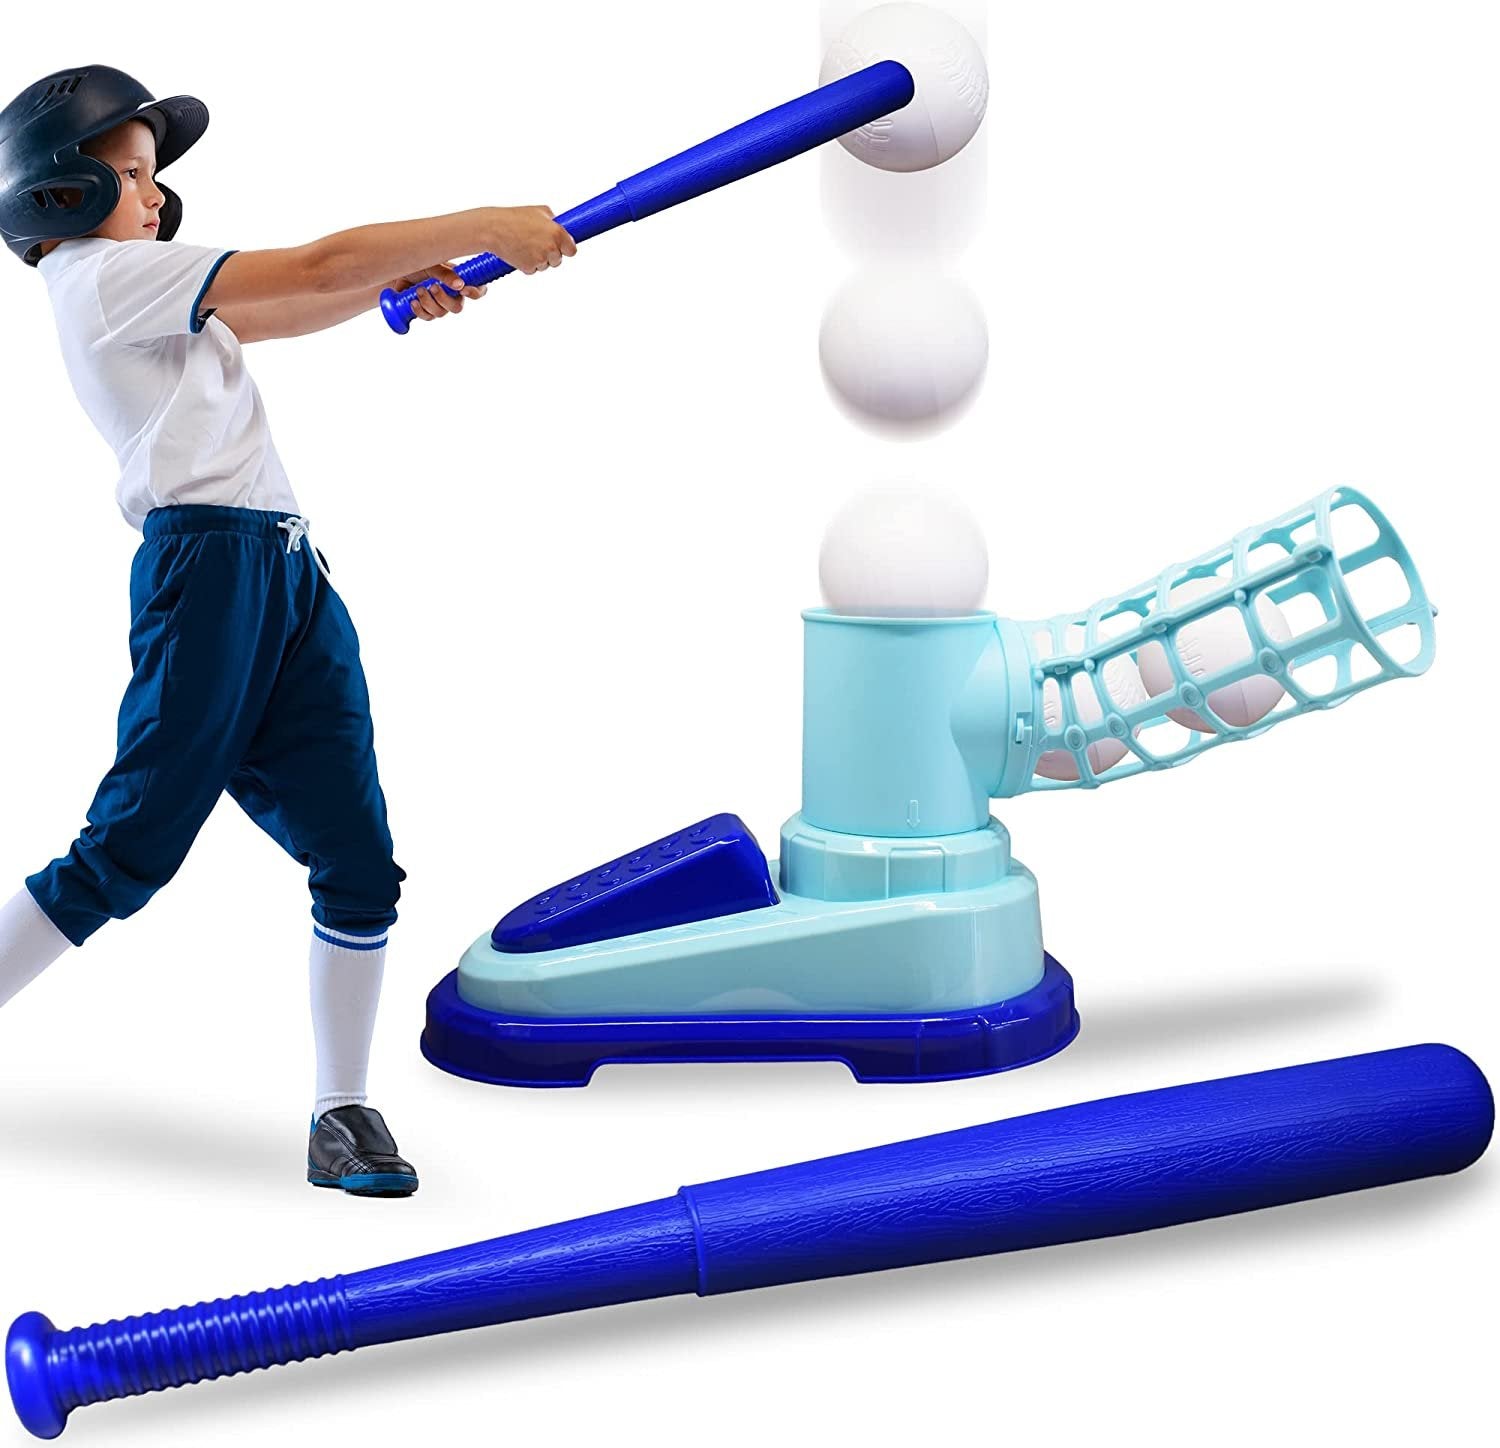 ArtCreativity Baseball Pitching Machine for Kids, Baseball Batting Machine Toy with Collapsible Bat, 3 Balls, and Pitching Unit, Baseball Pitching Trainer for Batting Practice, Outdoor Fun